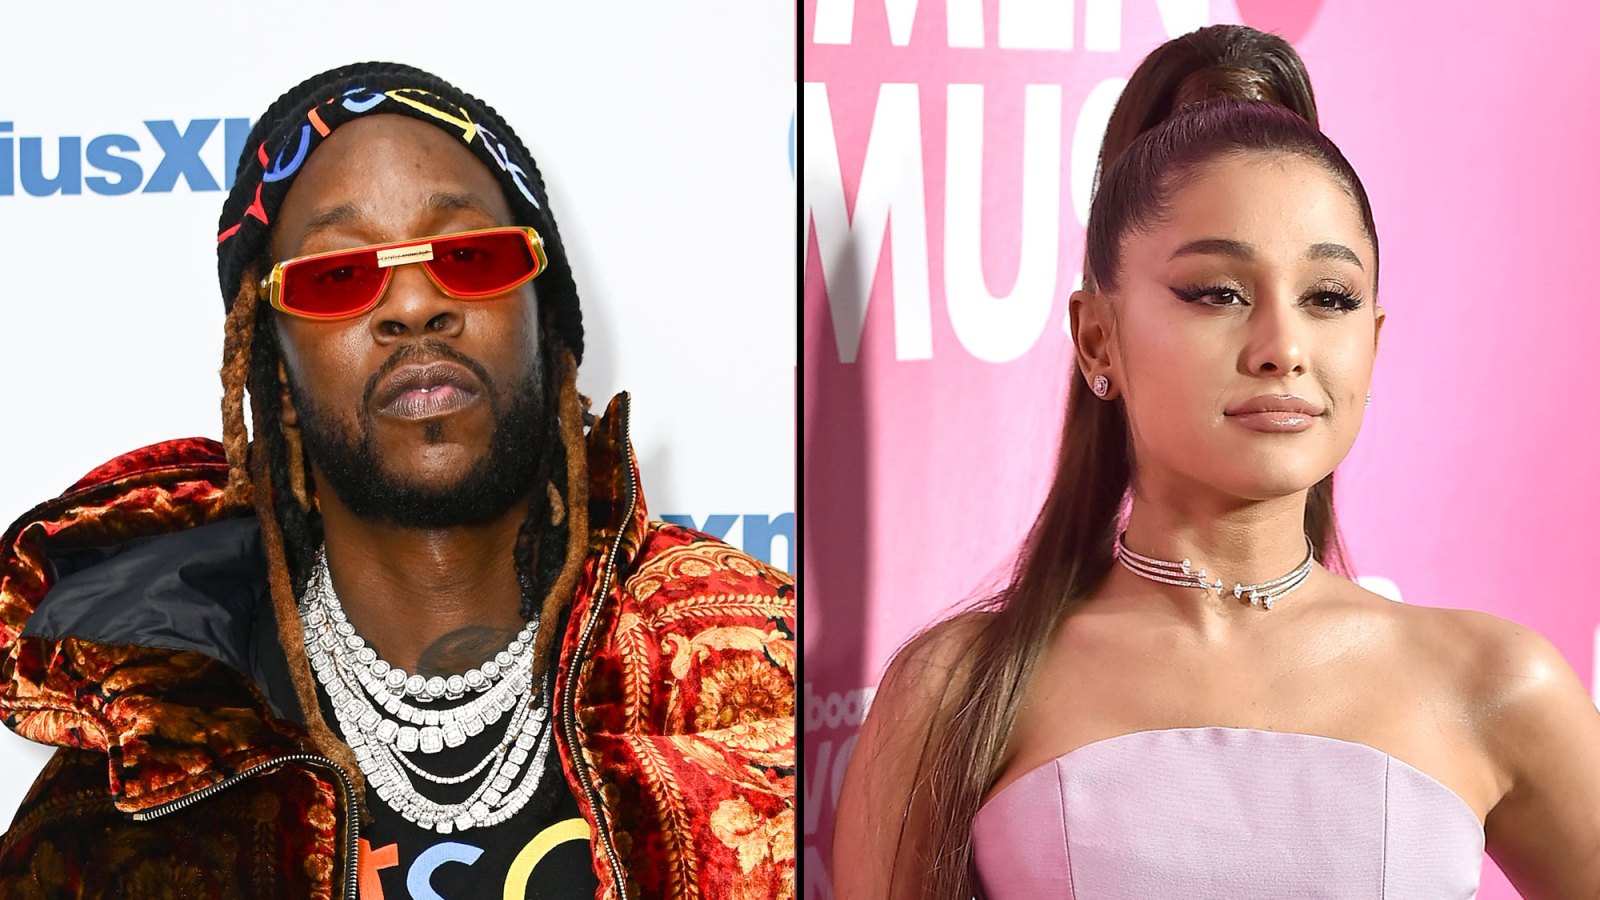 2 Chainz Reveals He Met Up With Ariana Grande to Discuss the ‘7 Rings’ Controversy